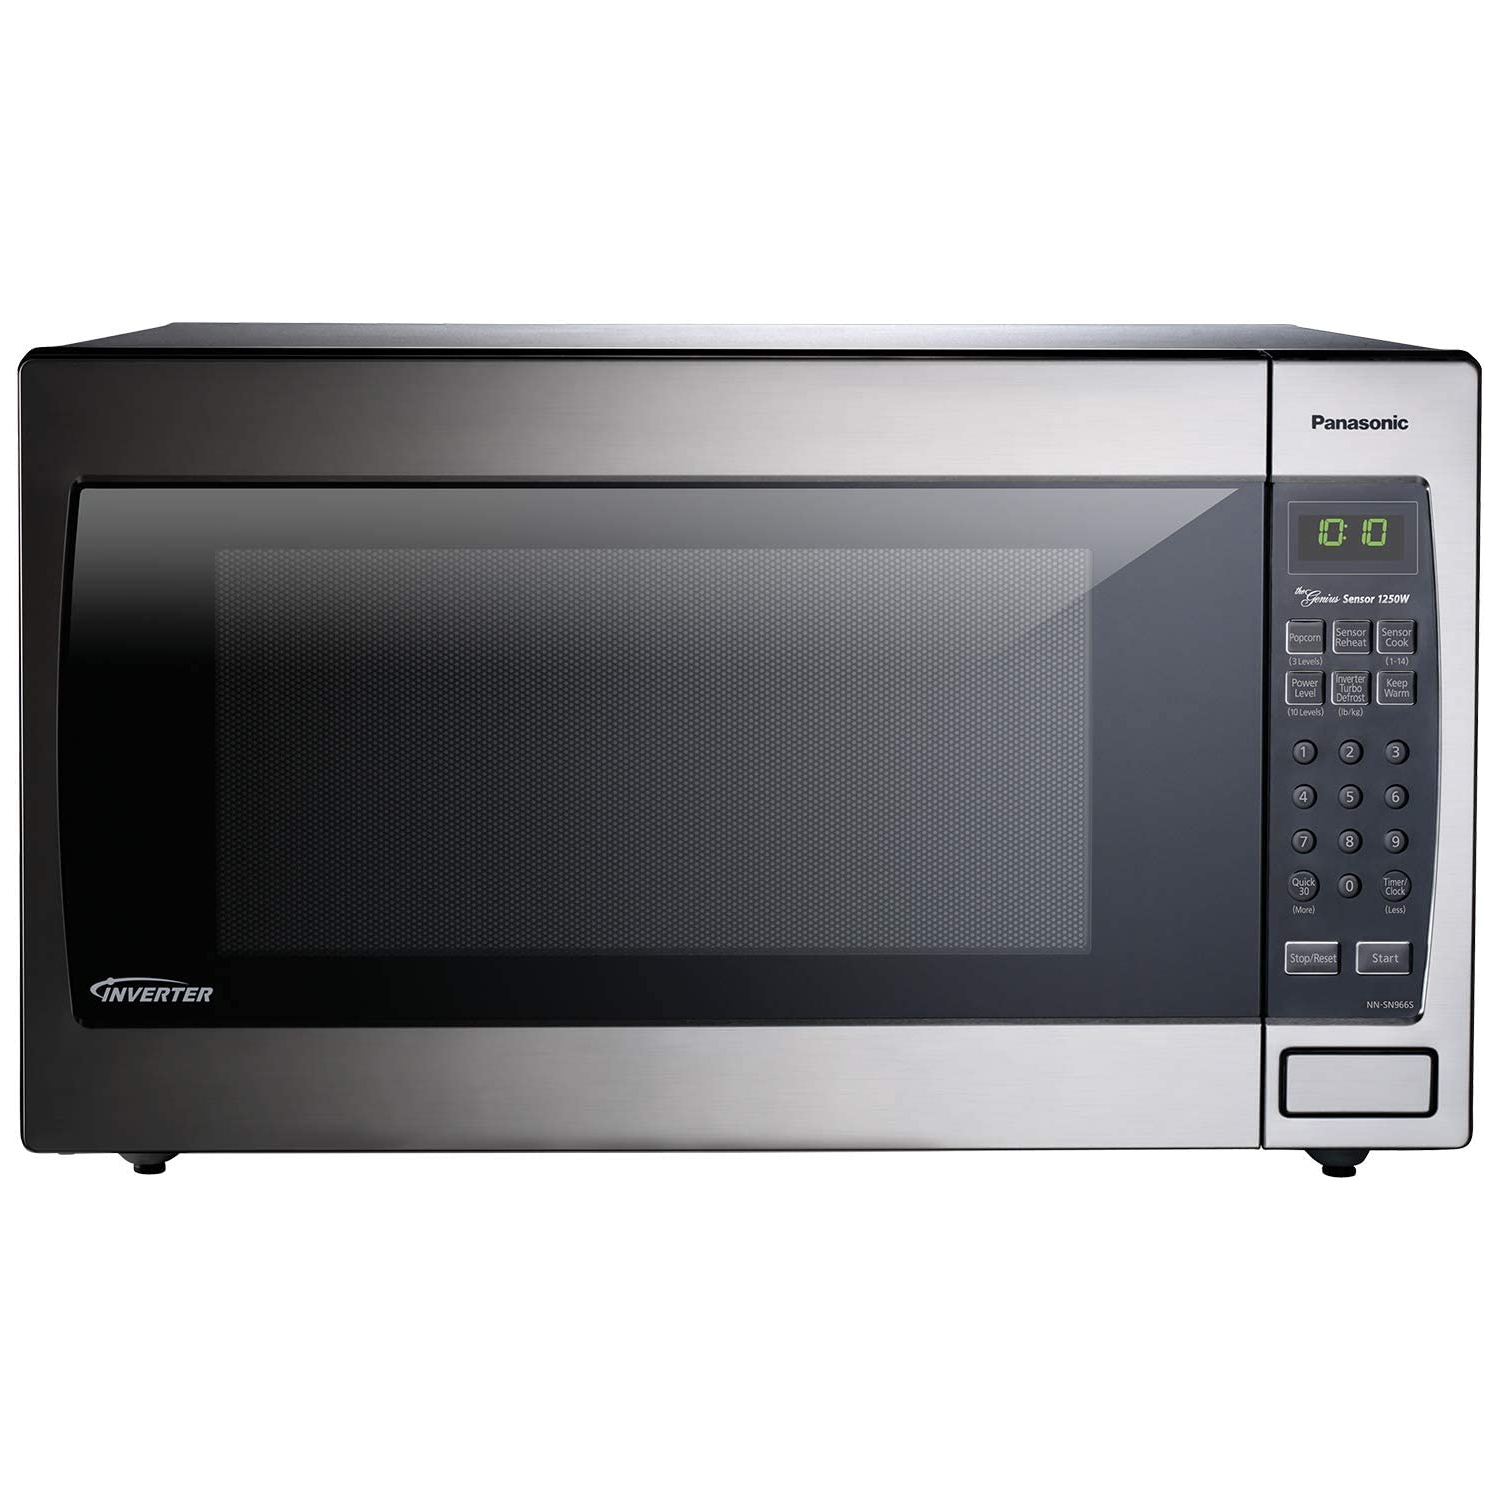 Panasonic 2.2 Cubic Foot Microwave Oven Countertop/Built-In with Inverter Technology and Genius Sensor in Stainless Steel, 1250W (NN-SN966S)